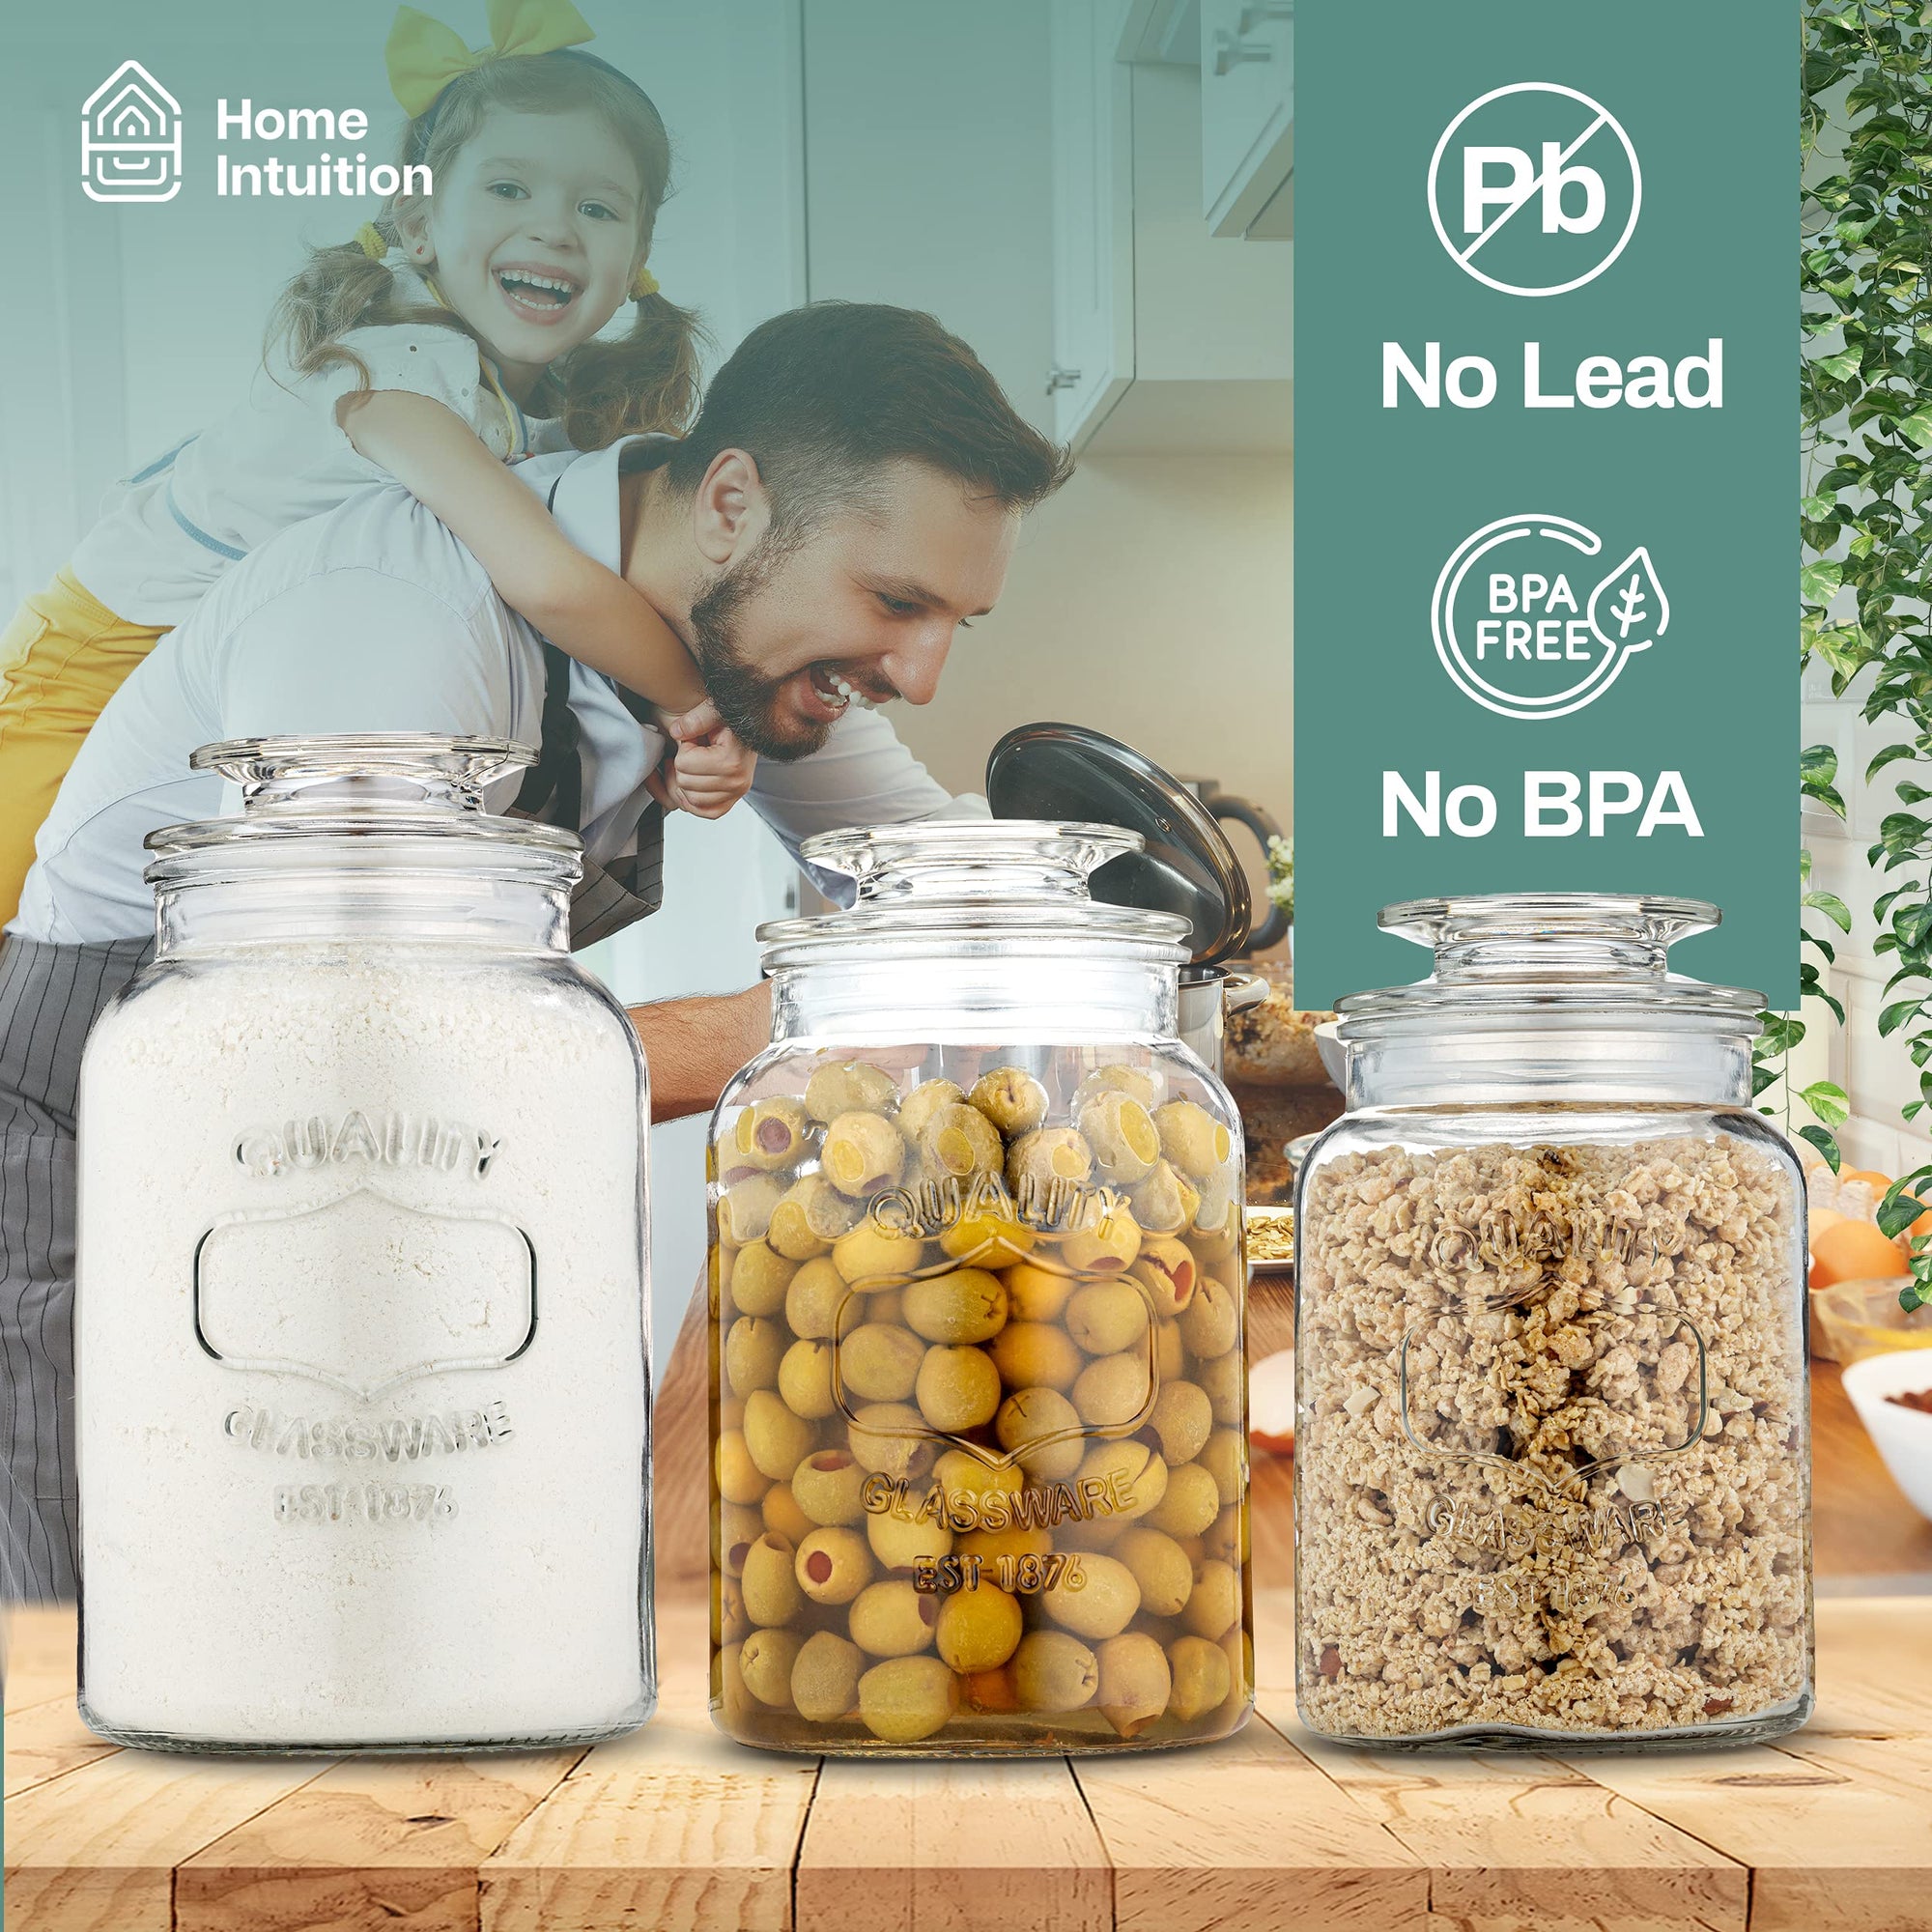 Home Intuition Heavy Glass Canister Set with Airtight Lid 3-Piece Set, Kitchen & Bathroom Apothecary Glass Jars For Candies, Cereal, Nuts & Bathroom Supplies, Storage Airtight Containers